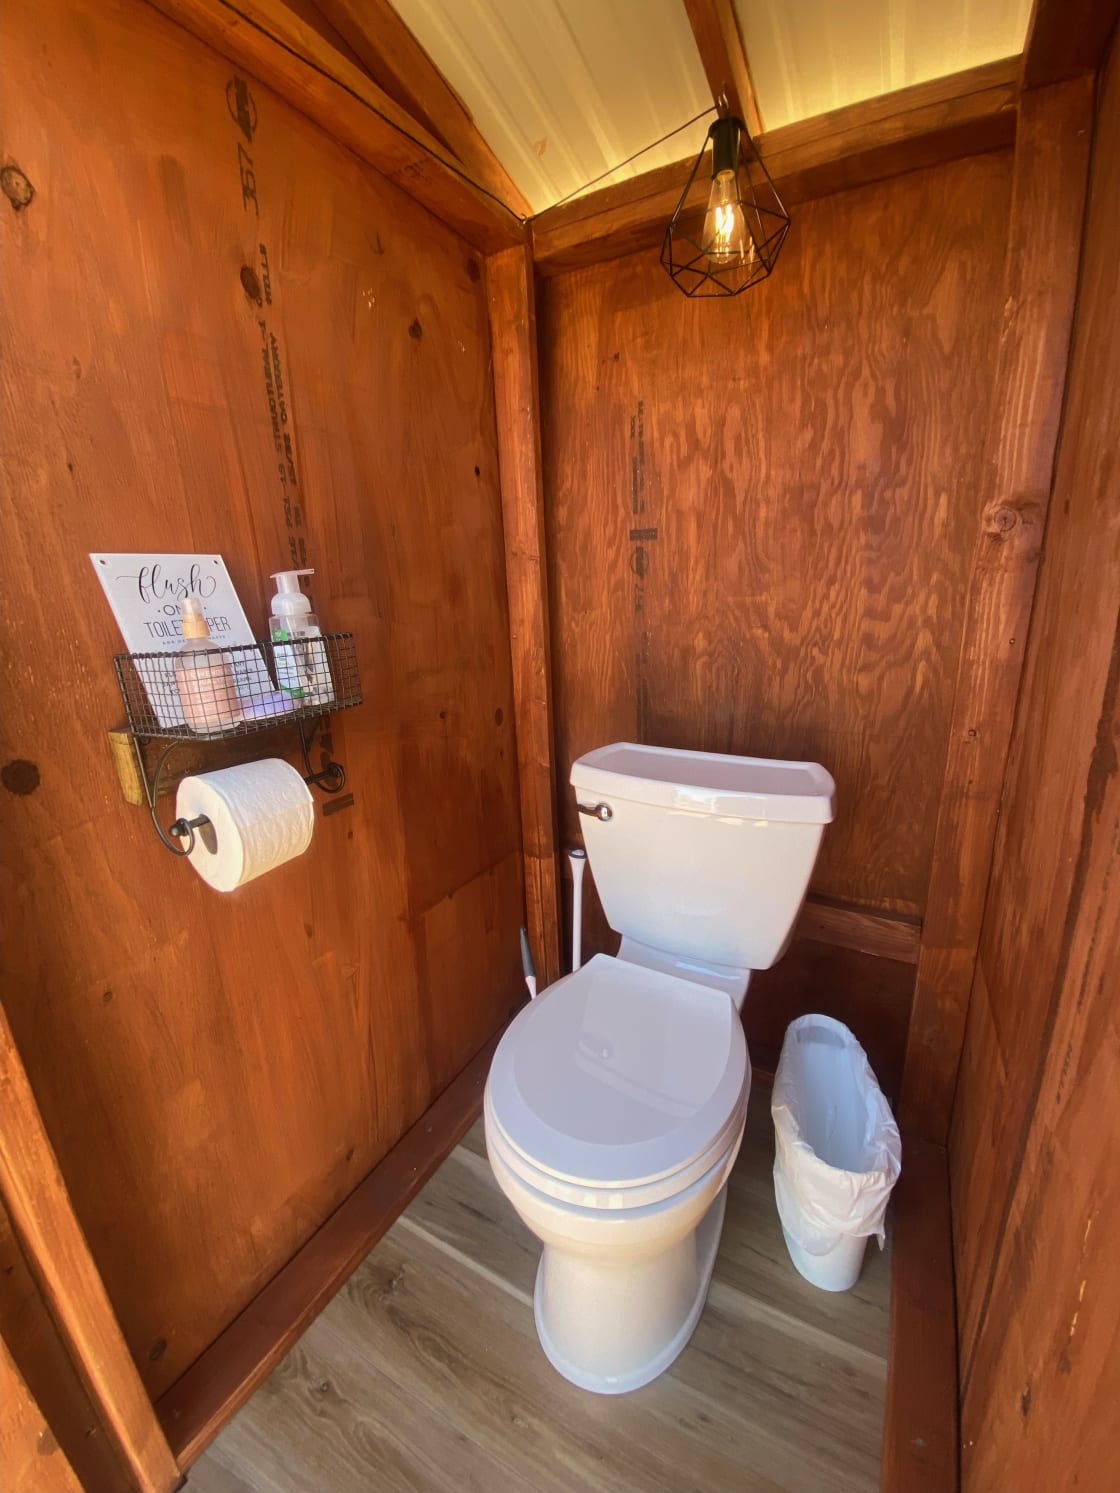 Enjoy your own PRIVATE and clean outhouse! Just a few steps off your wrap around deck, you get to enjoy your own flushing toilet equipped with everything you need to feel comfortable! Your outhouse is even lit by a solar powered light! 